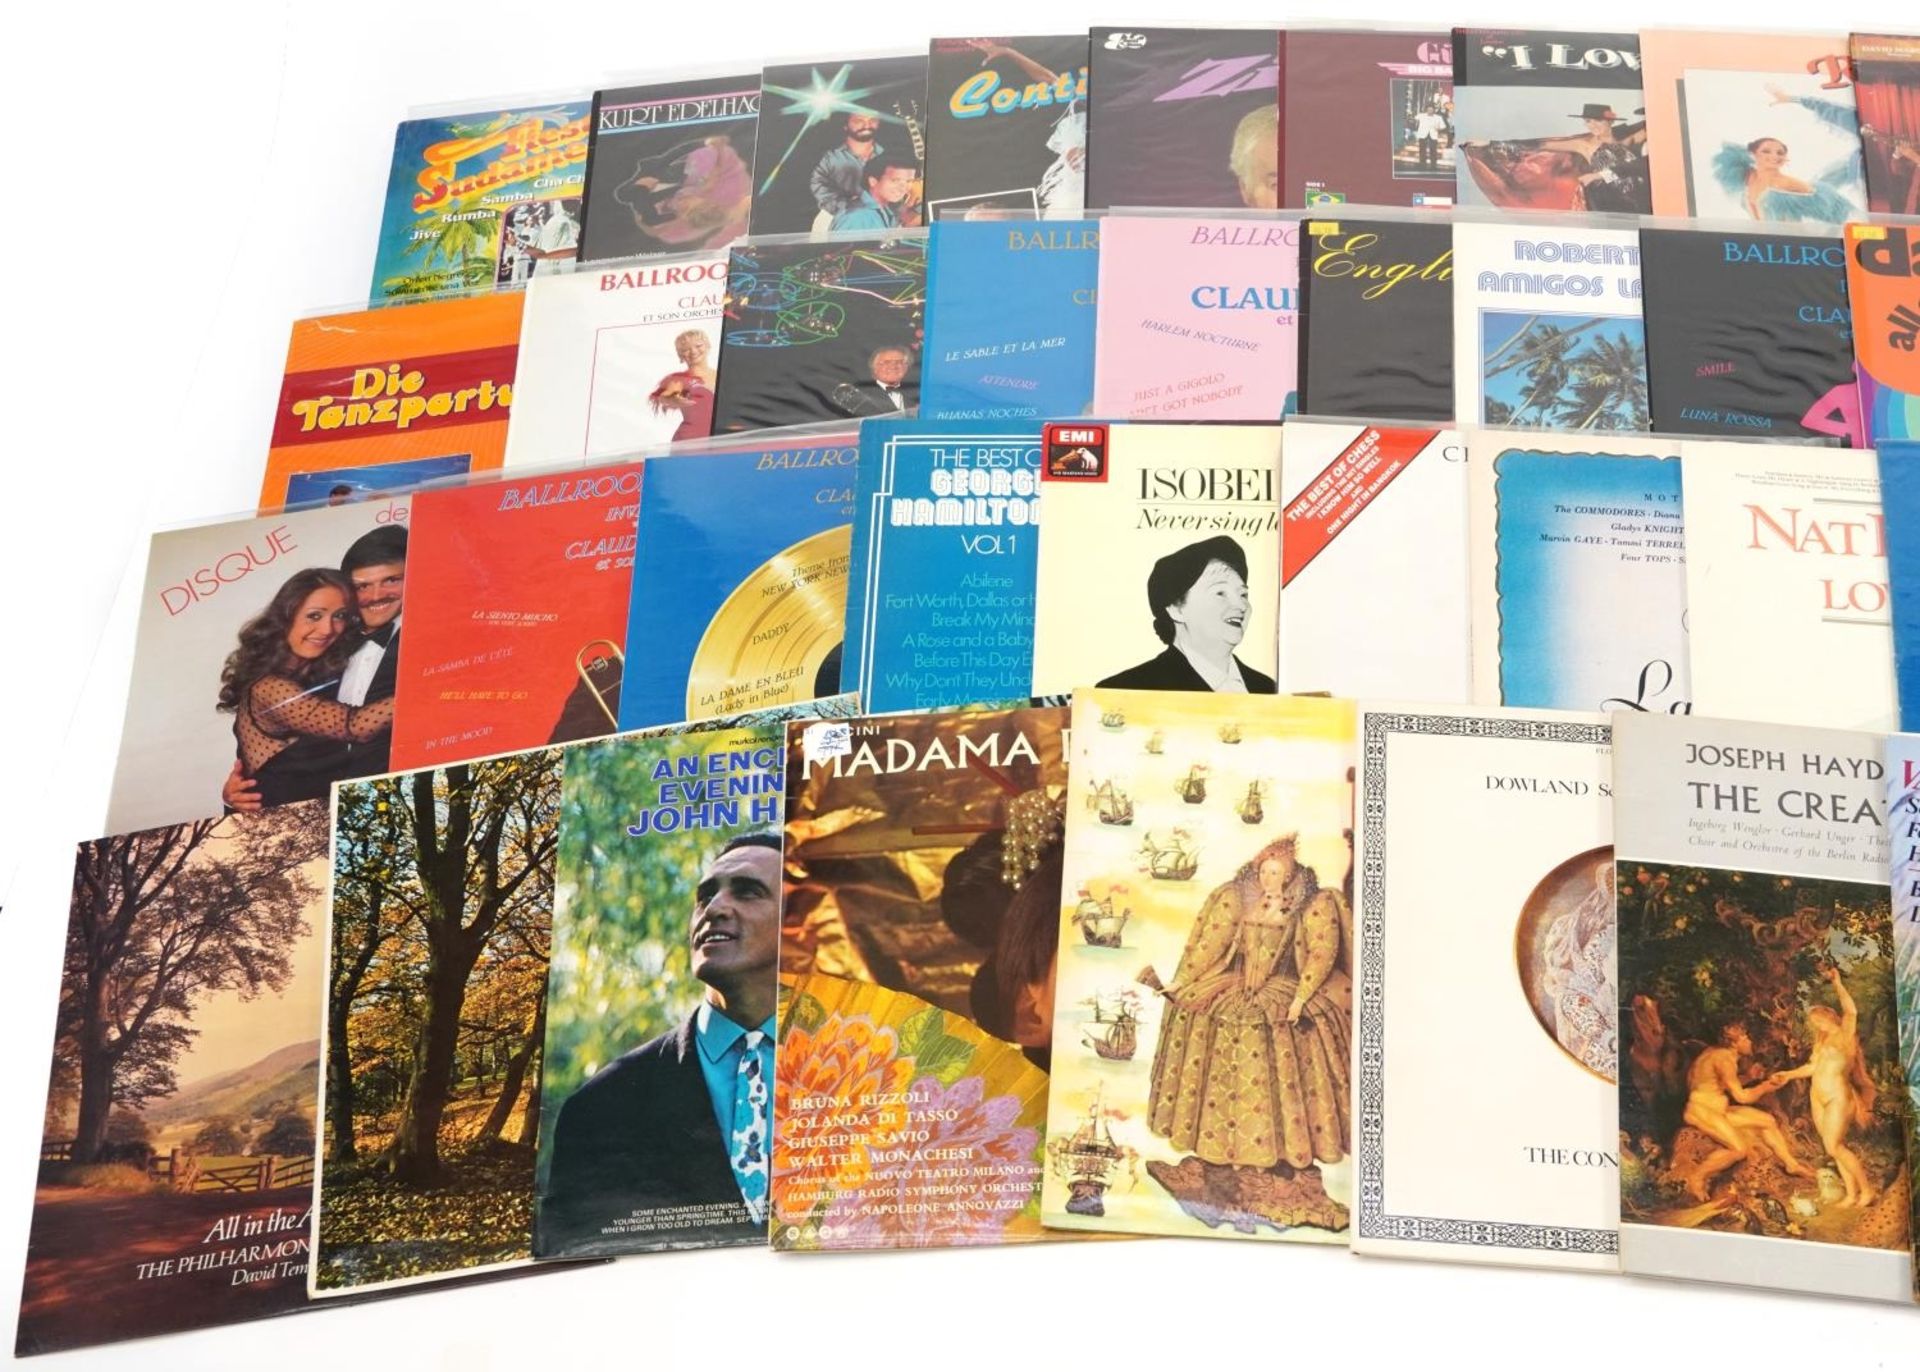 Predominantly Latin and classical vinyl LP records including Nat King Cole, Sydney Thompson, - Image 2 of 4